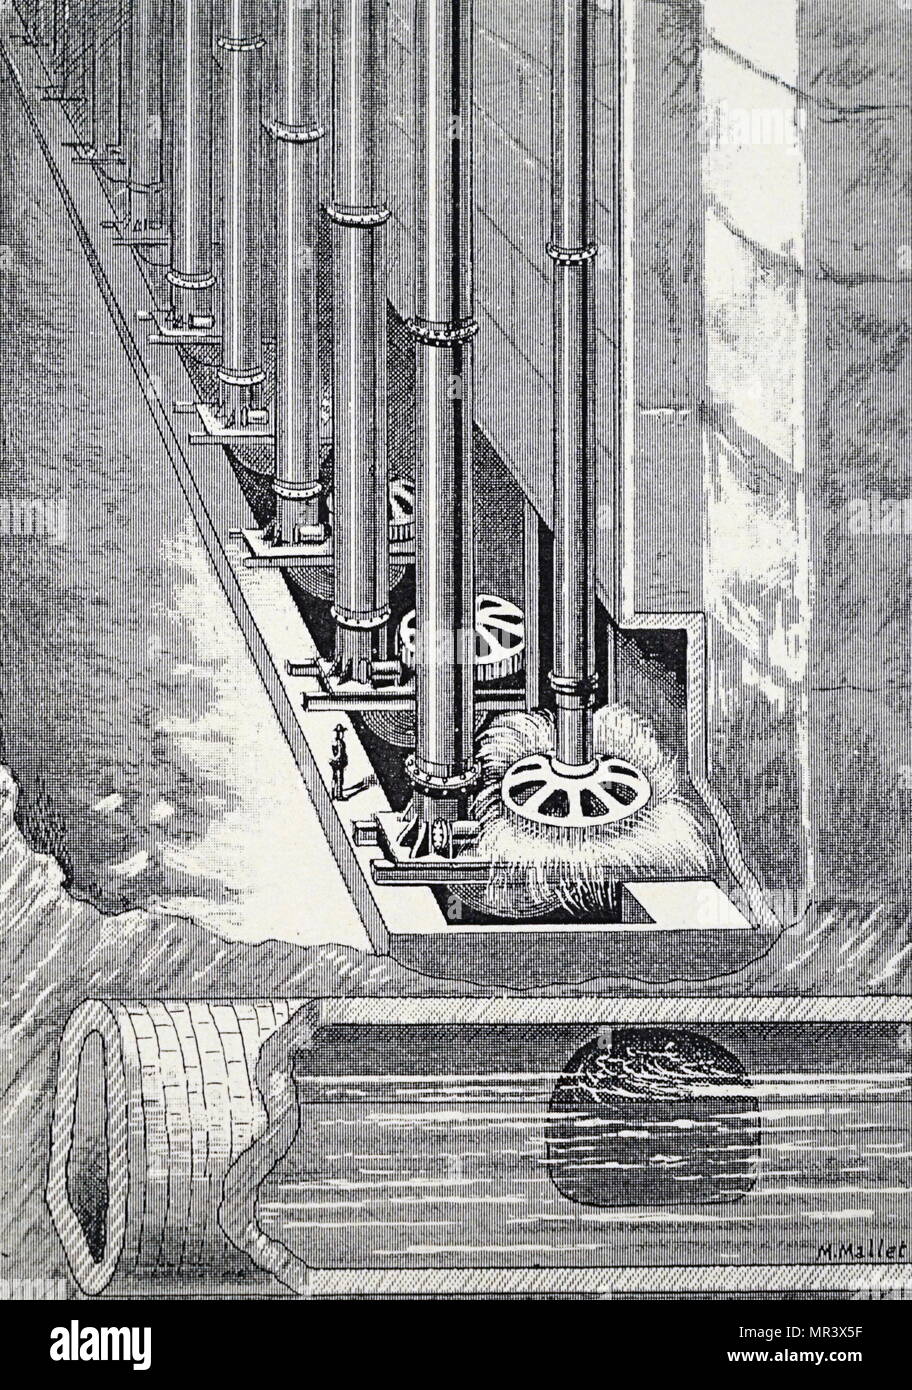 Engraving depicting the turbines of the Niagara Falls hydroelectric power station. Dated 19th century Stock Photo